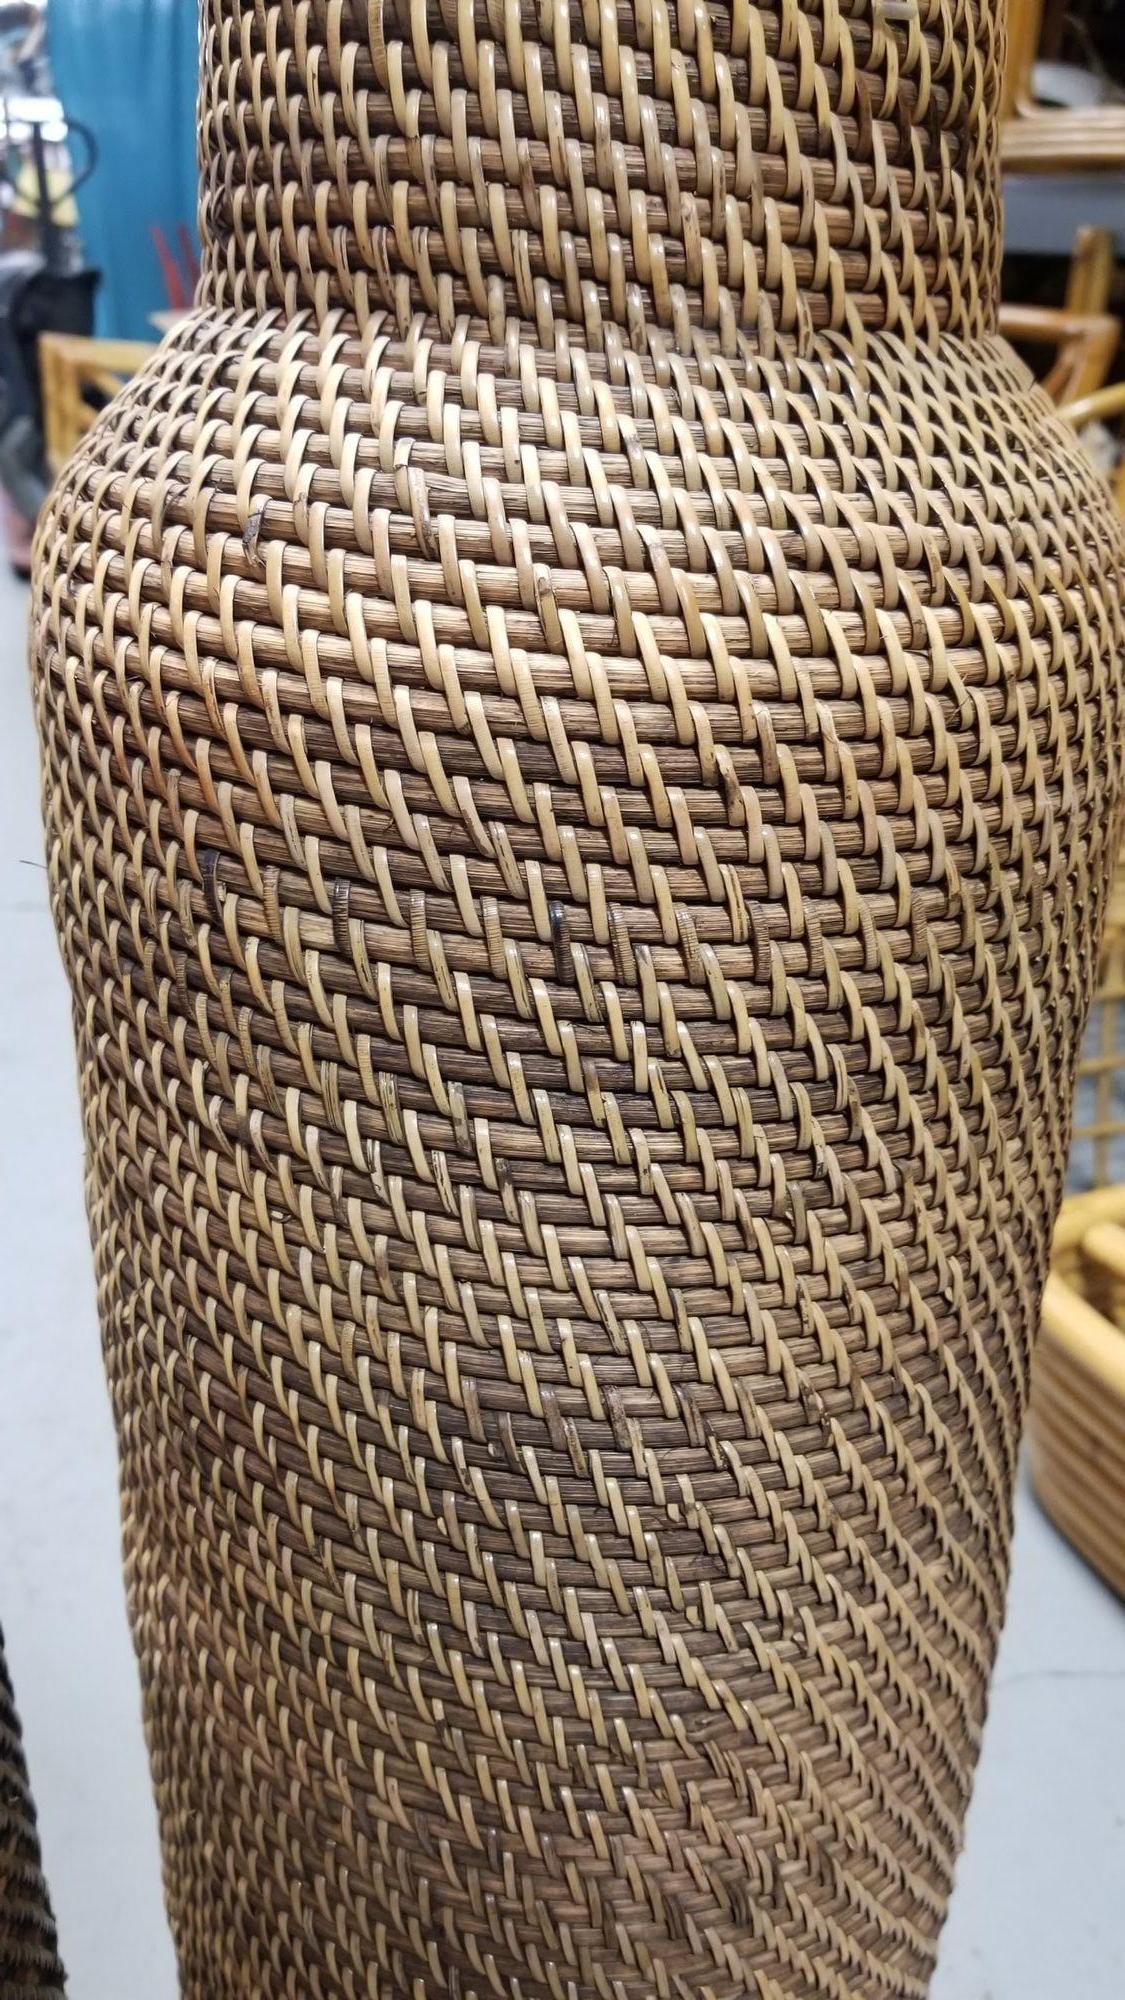 Late 20th Century Restored Reed Rattan Wicker Decorative Vases Gabriella Crespi Styled - Pair of 2 For Sale